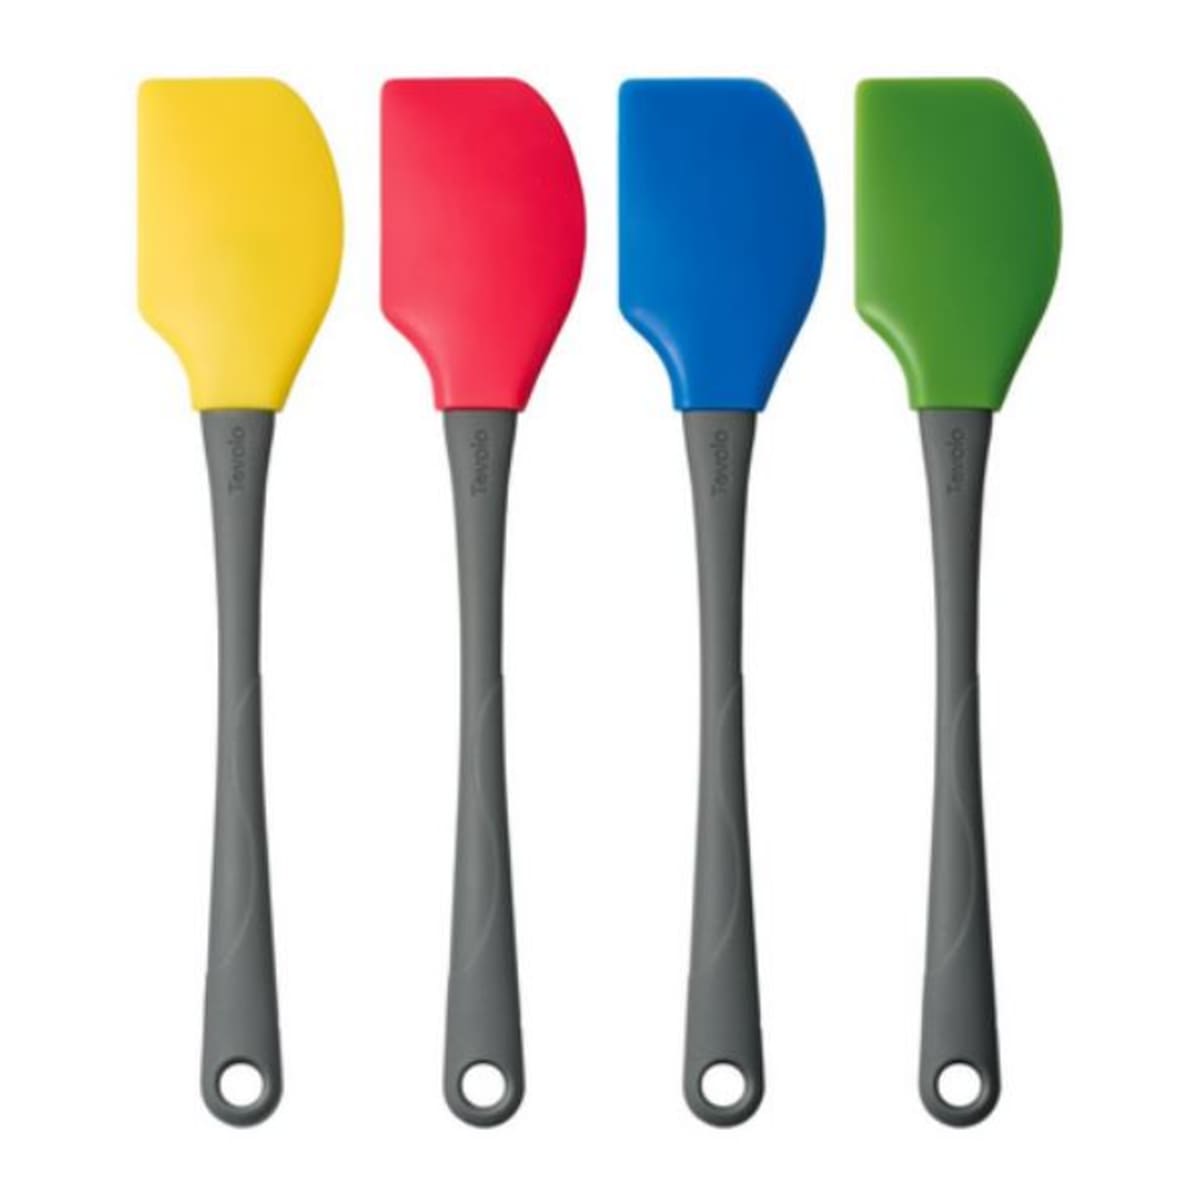 Tovolo Holiday Spatulart Spatula, Kitchen Utensil for Food and Meal Prep,  Baking, Mixing, Turning, and More